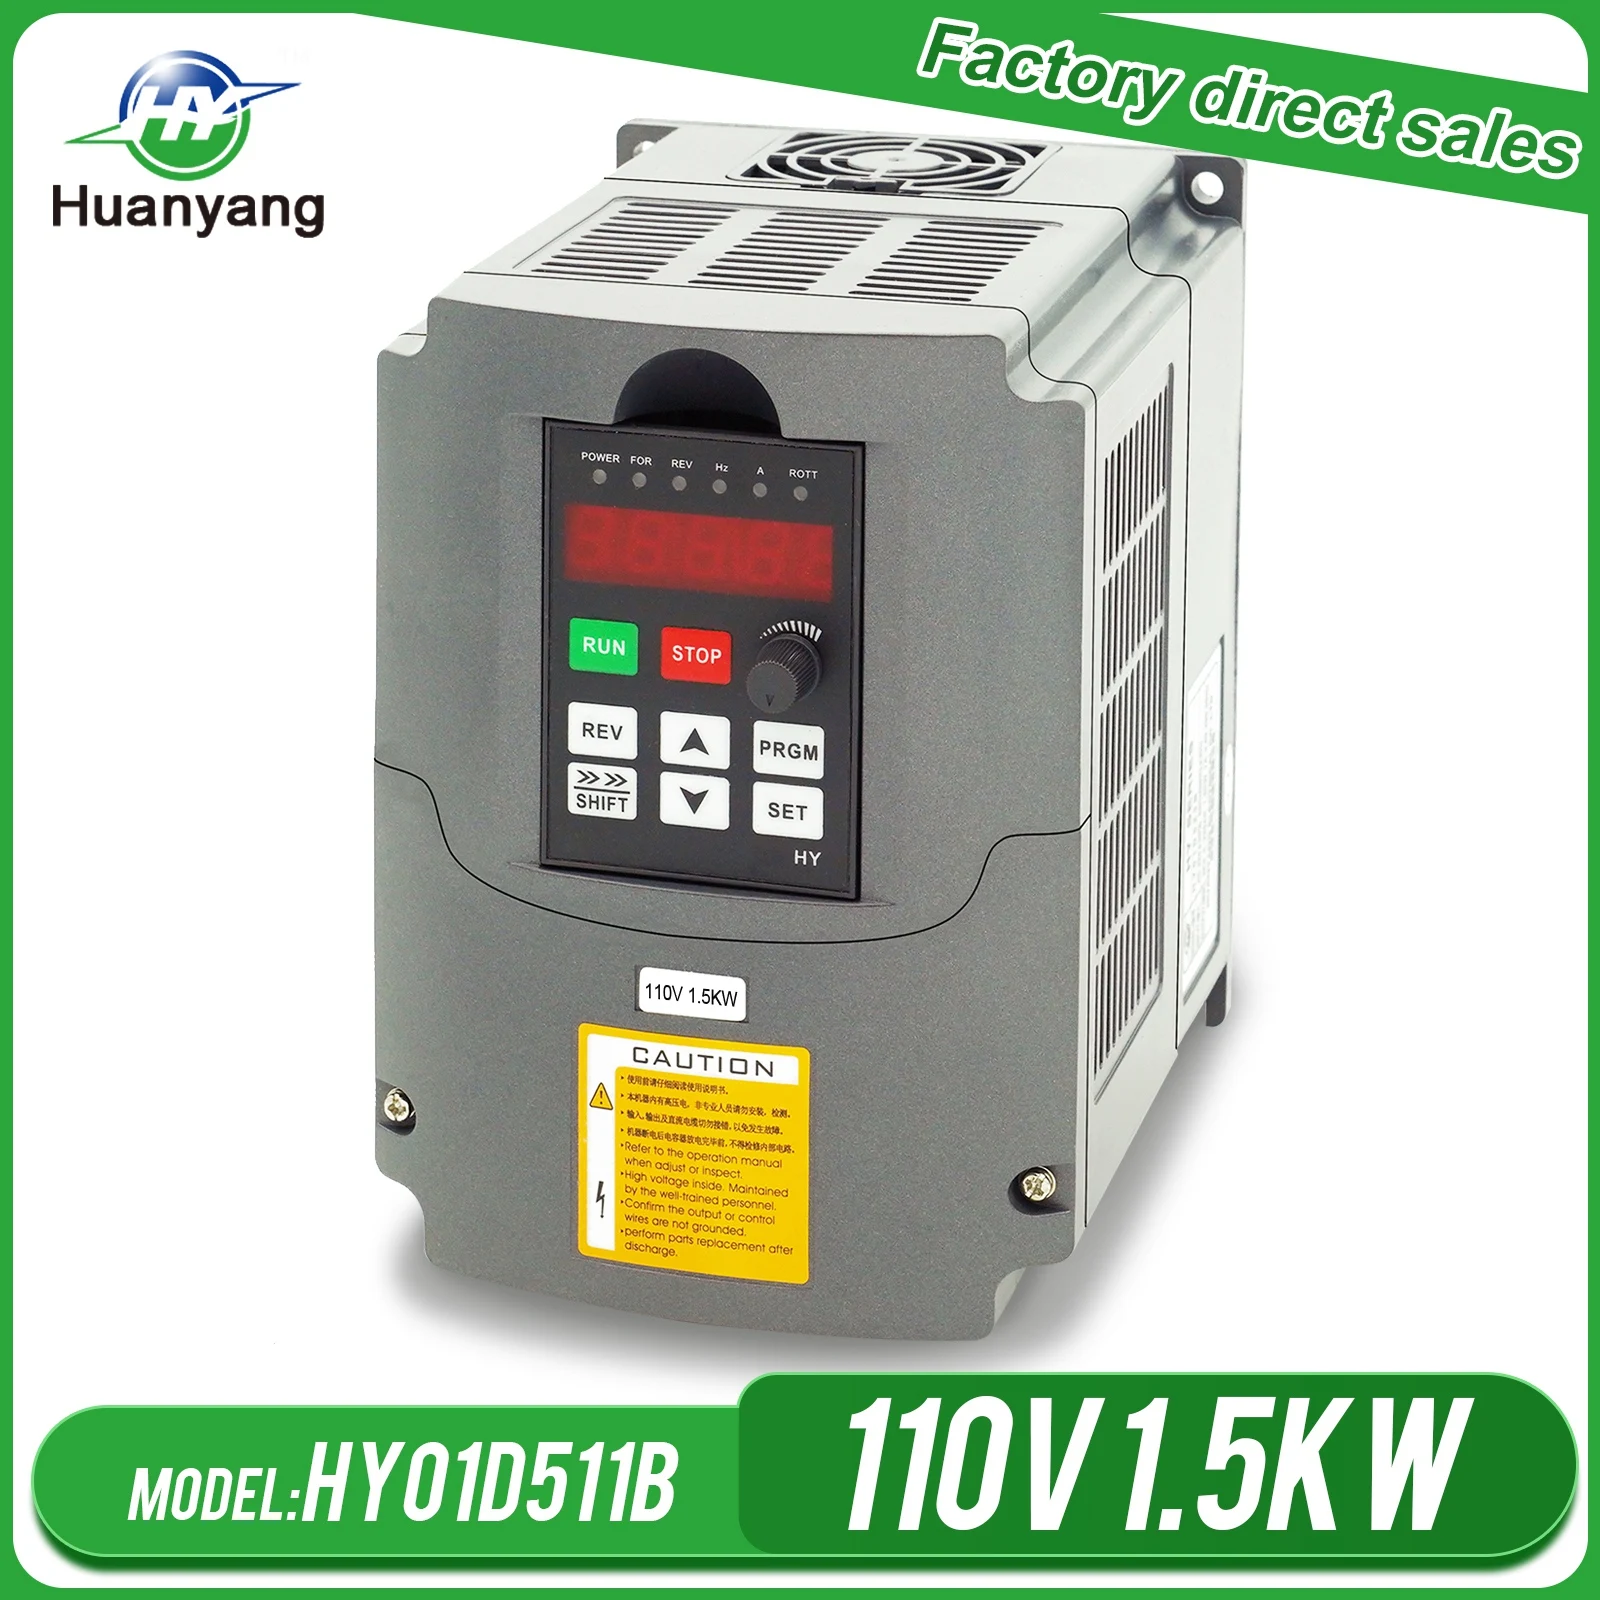 HUANYANG DRIVE VFD VARIABLE FREQUENCY INVERTER 5.5KW,7.5KW,1.5KW,3KW,4KW,2.2KW 